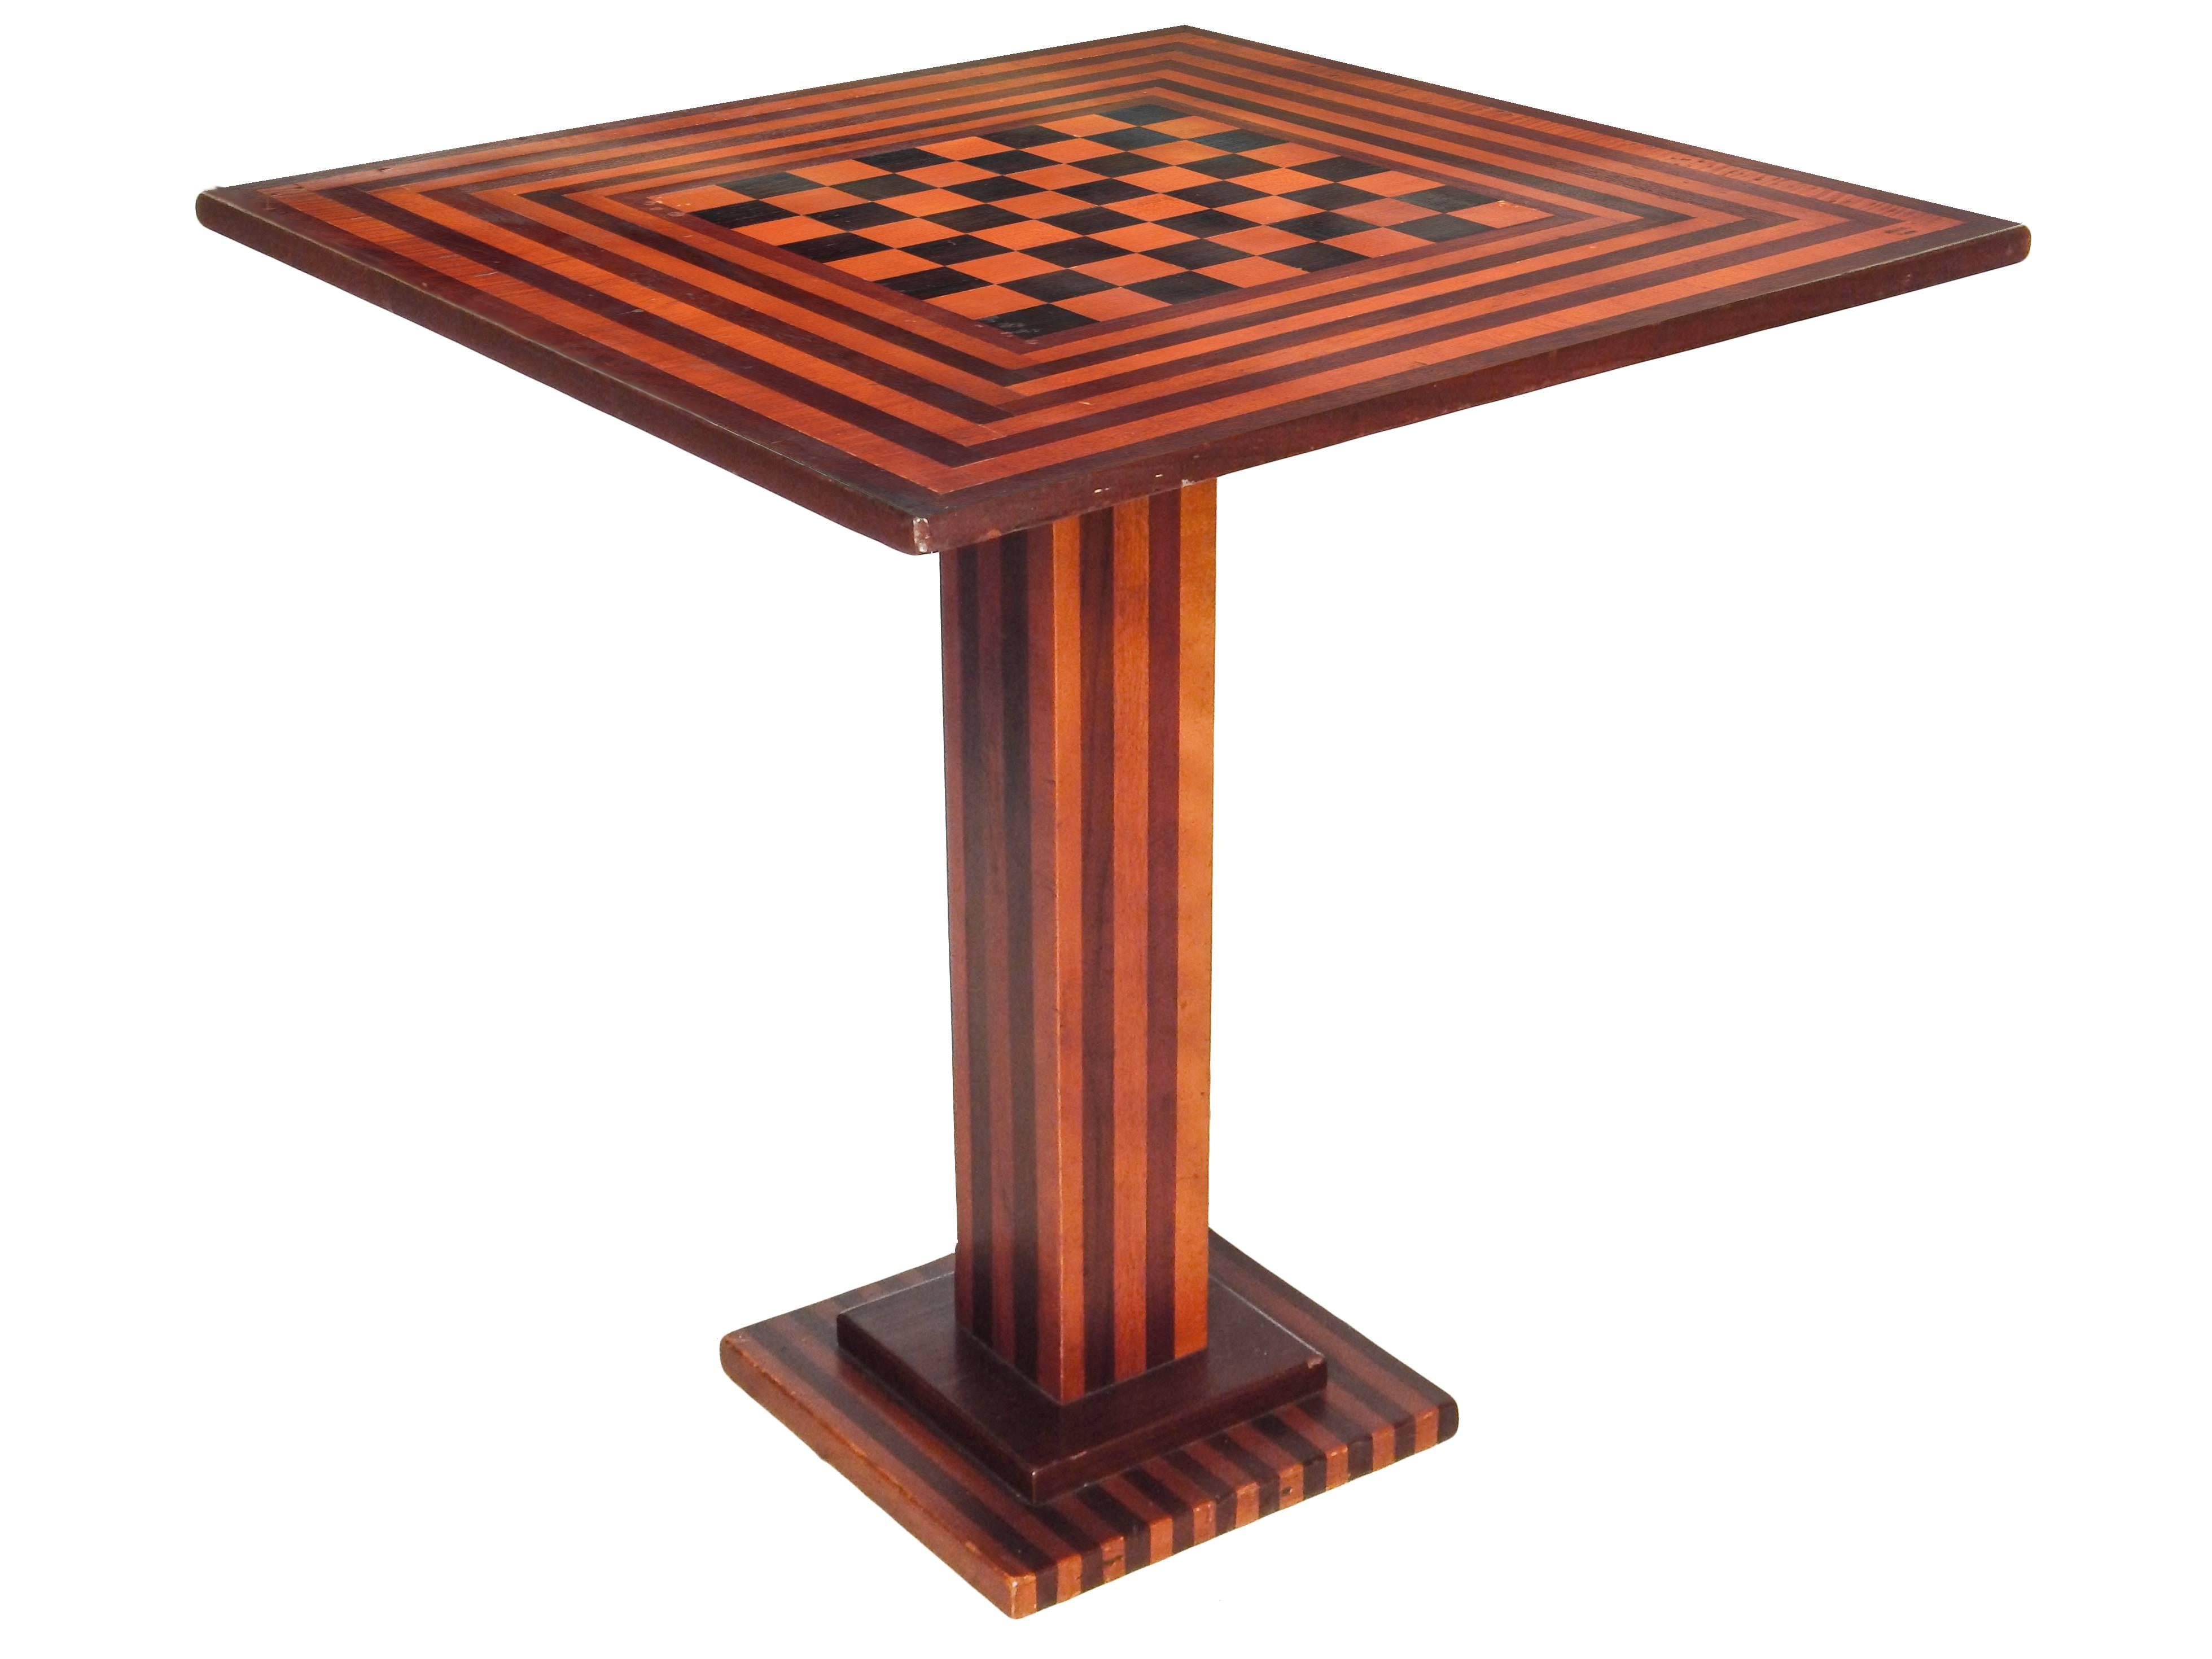 Handmade tilt-top checkerboard side/game table with trine base.
Measures: 39.5